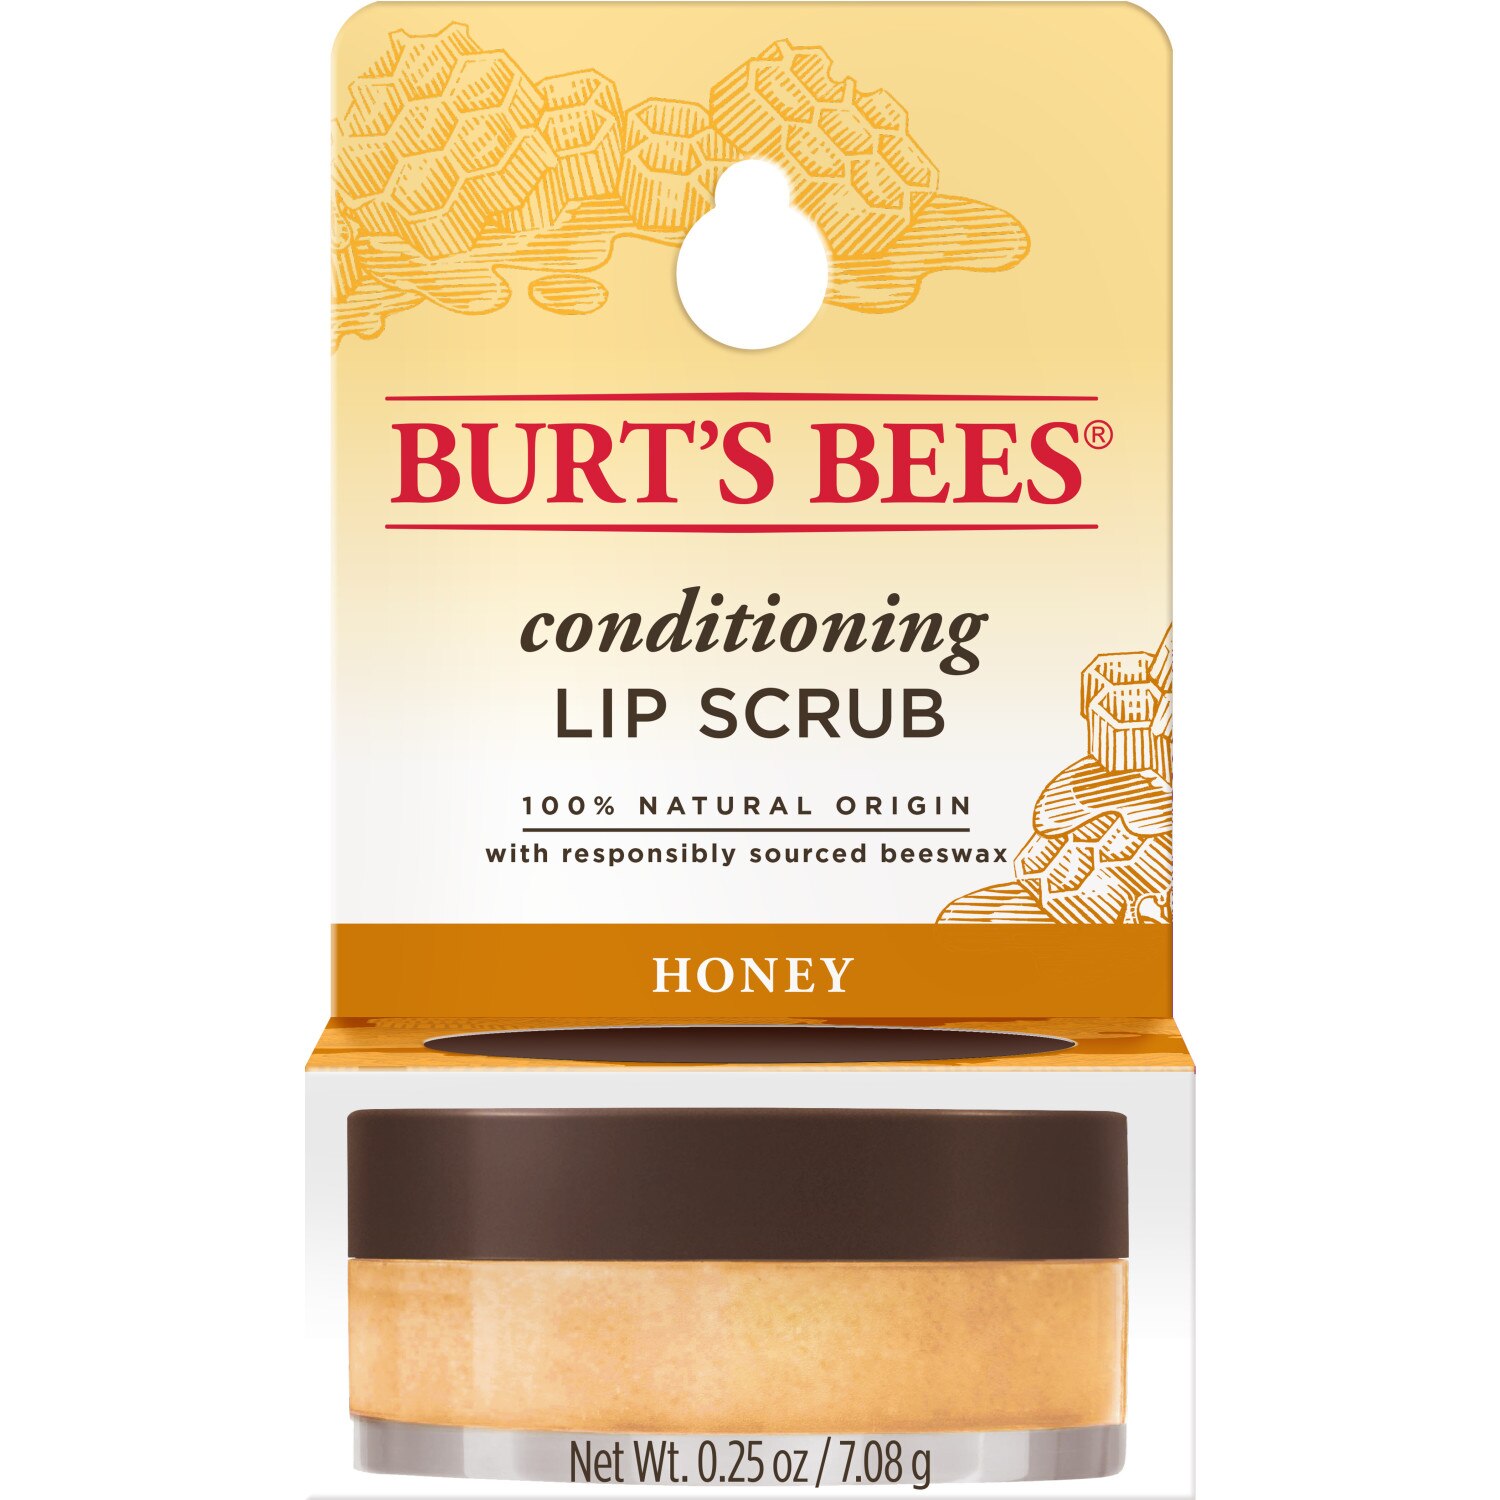 Burt's Bees 100% Natural Conditioning Lip Scrub with Exfoliating Honey Crystals, 0.25 OZ